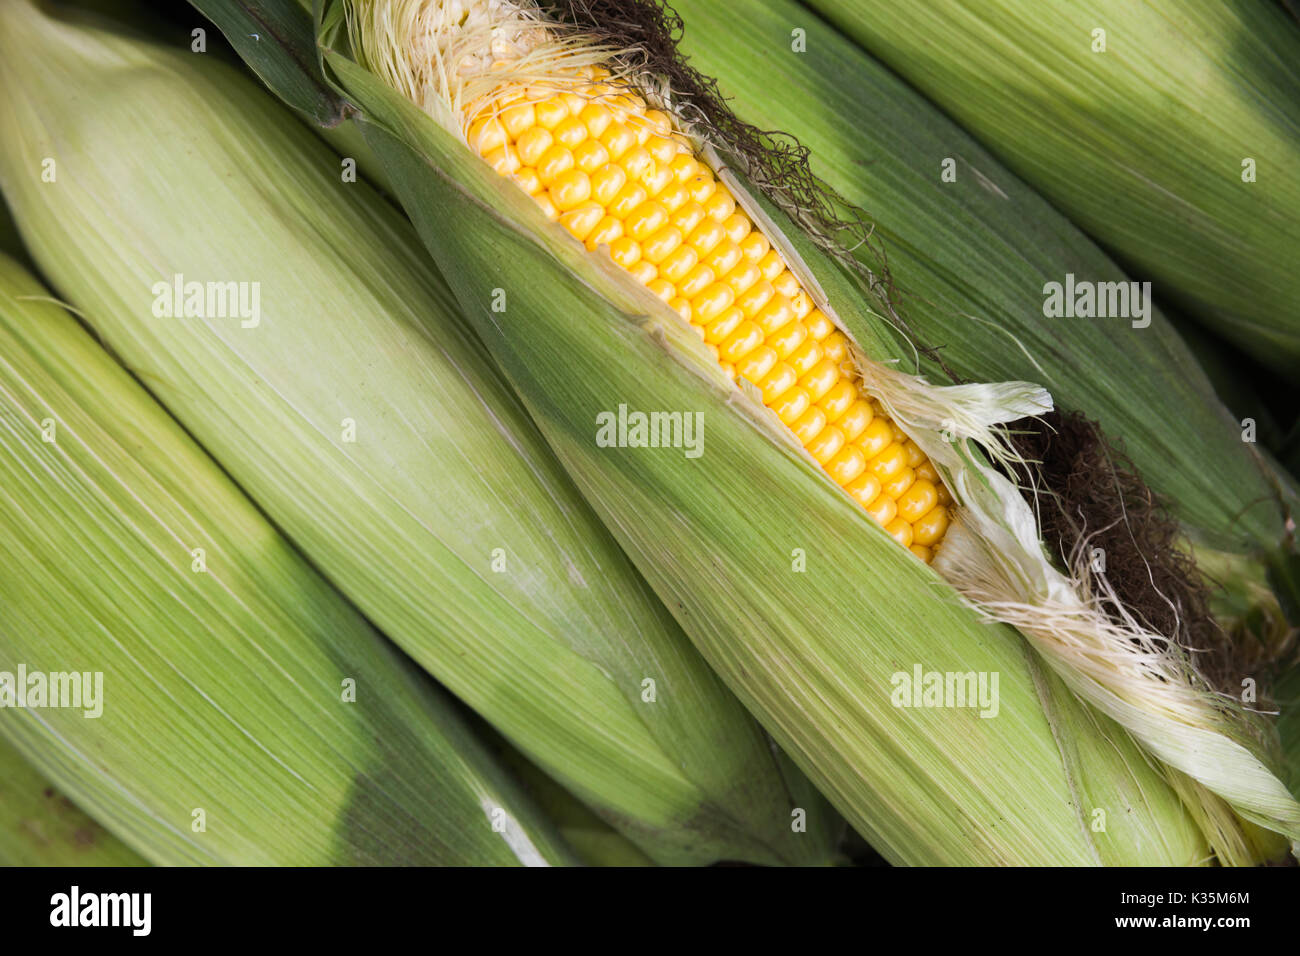 Corn cobs lay on the counter of street food market on Madeira island, Portugal. Close-up photo with selective focus Stock Photo